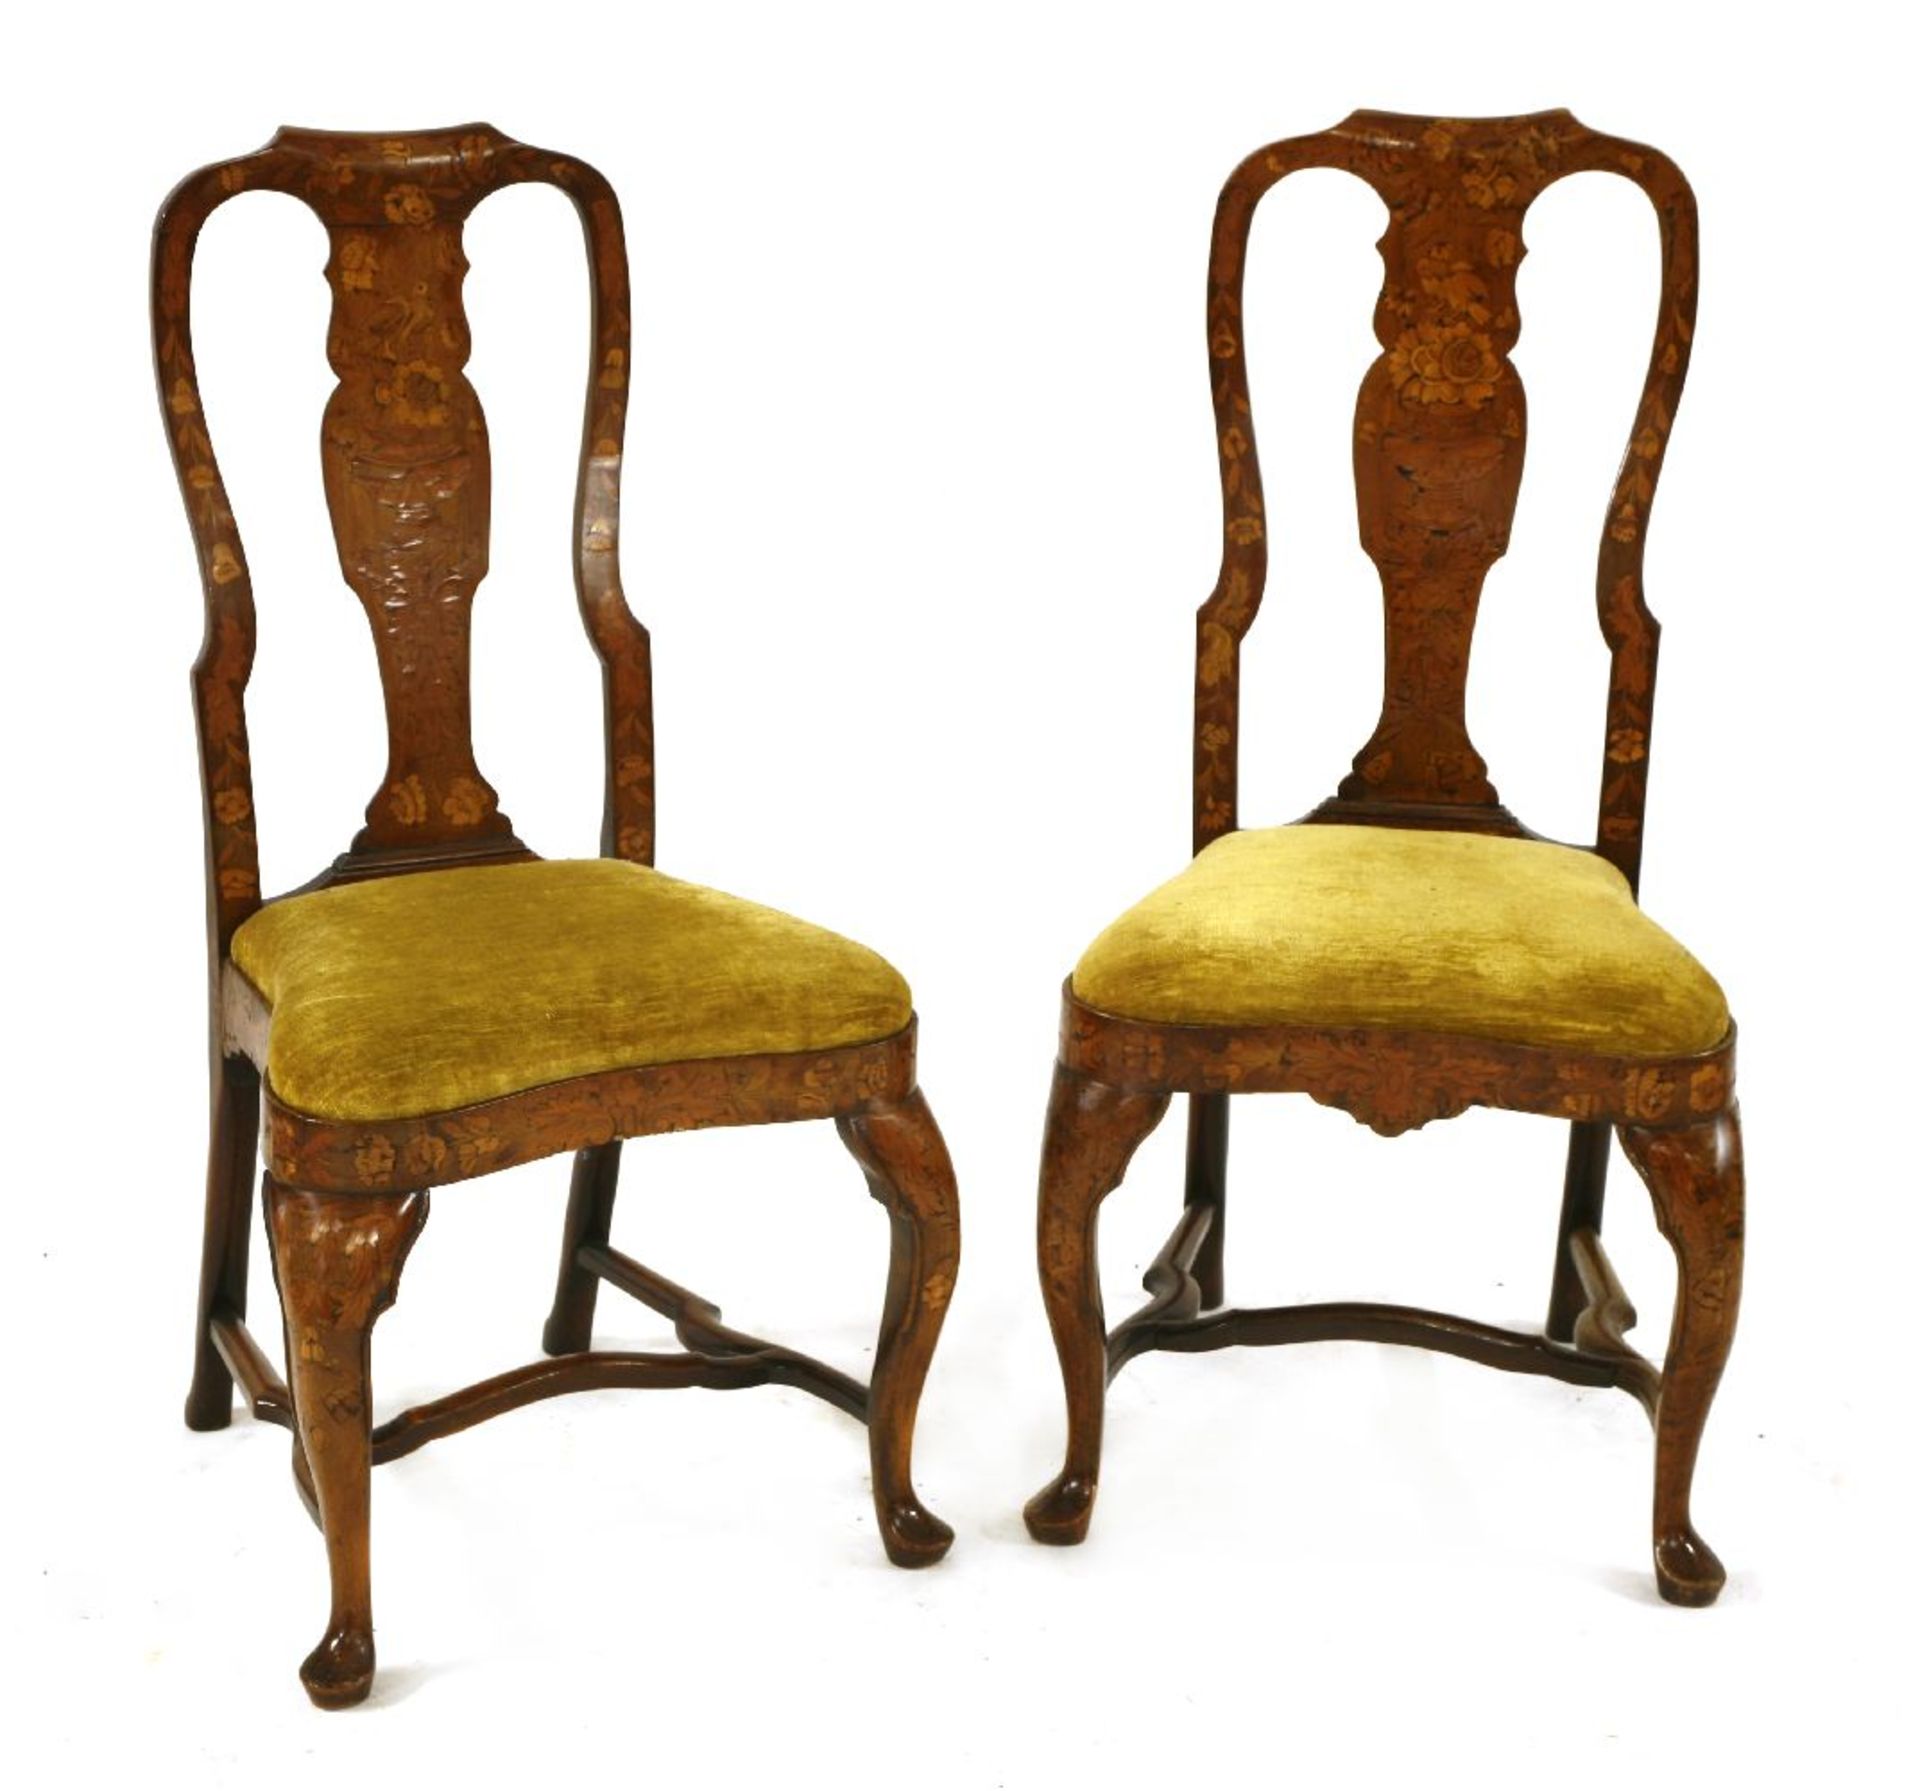 A pair of Dutch marquetry and walnut single chairs,18th century, the shaped backs with baluster